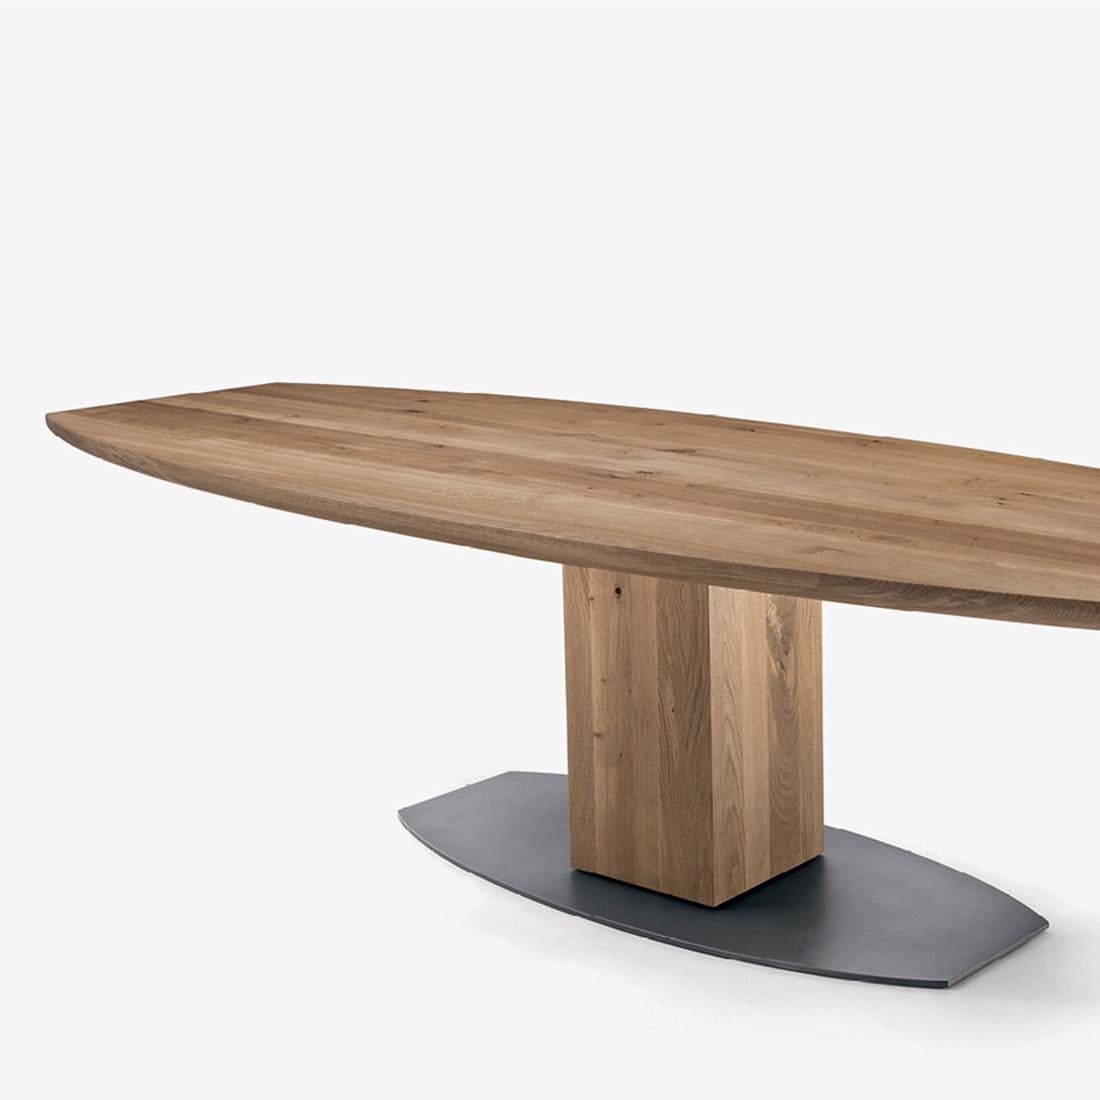 Dining table oak oval T in solid natural
oakwood and with lacquered iron base.
Base made in on block of oakwood.
Oak treated with natural pine extracts
wax.
Available in:
L 200 x D 100 x H 73.5cm, price: 11900,00€ 
L 220 x D 100 x H 73.5cm, price: